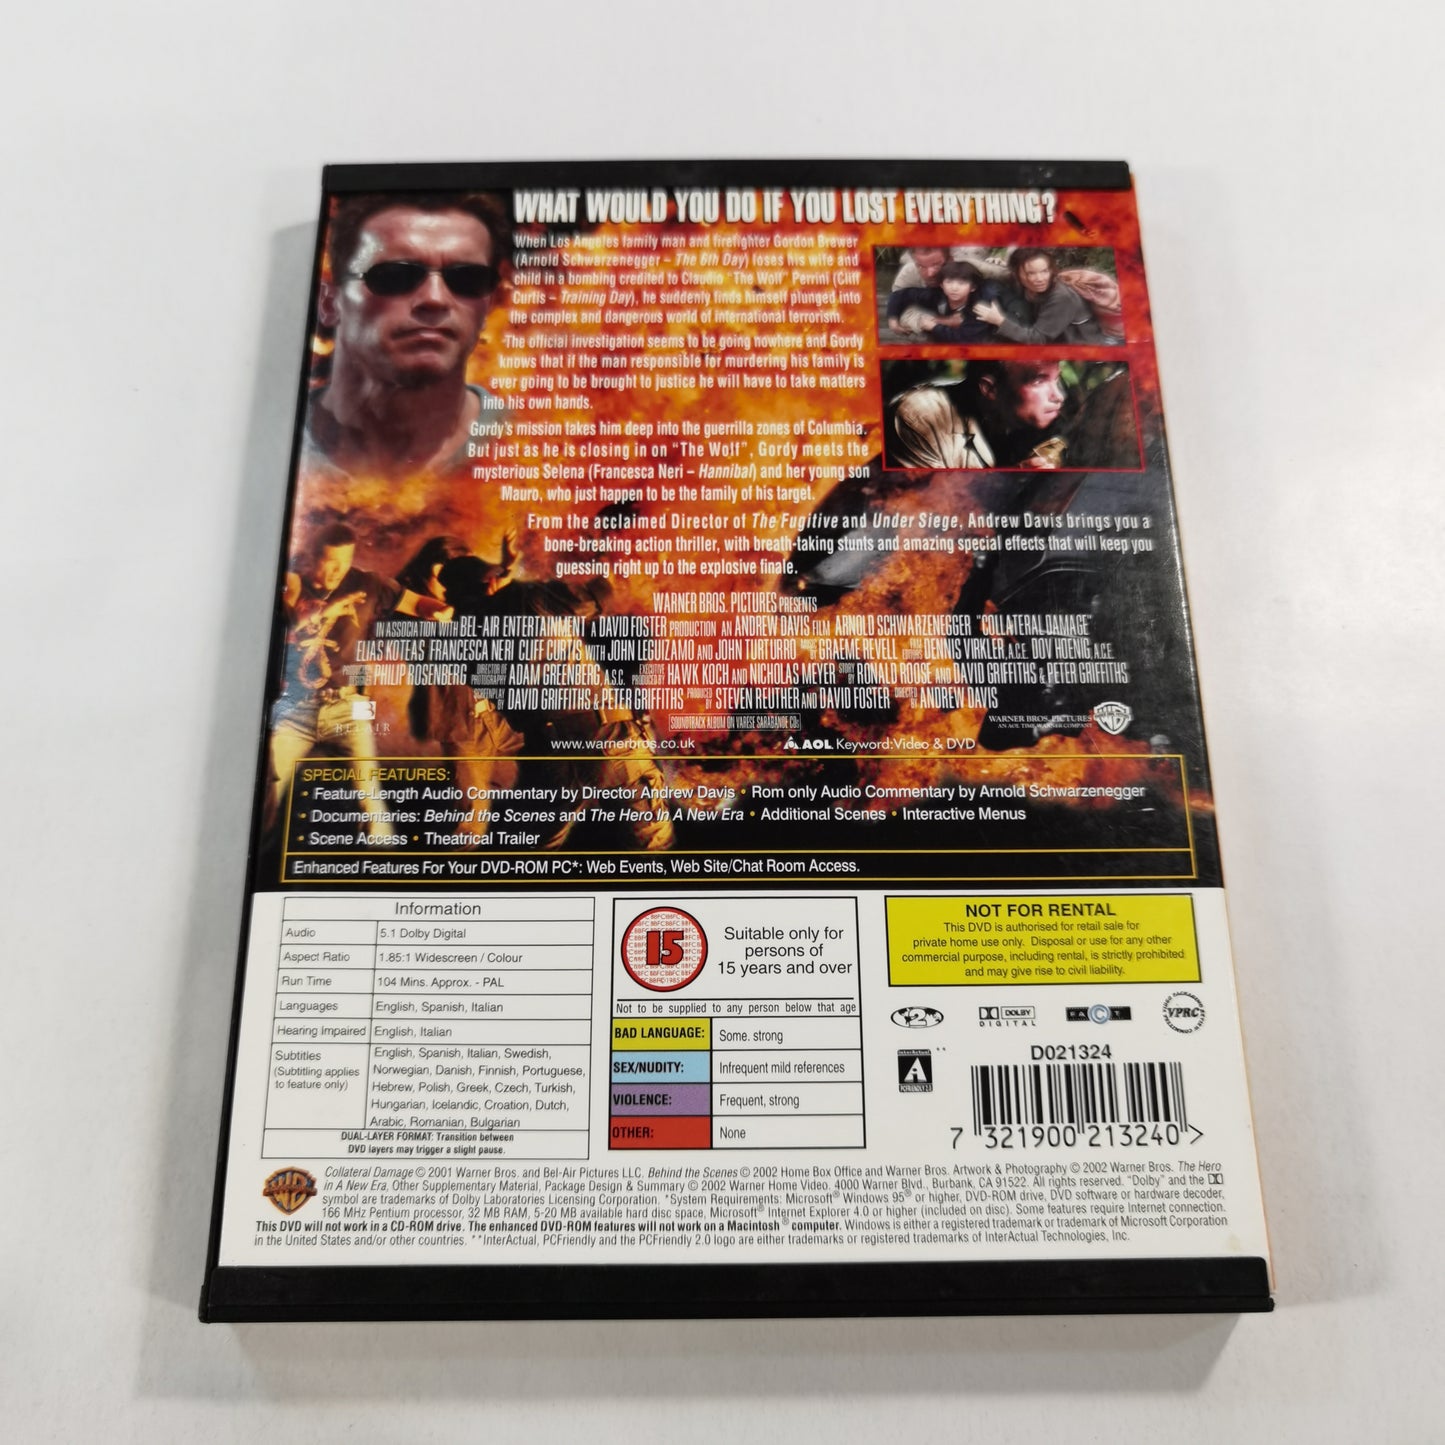 Collateral Damage (2002) - DVD 7321900213240 Snap Case